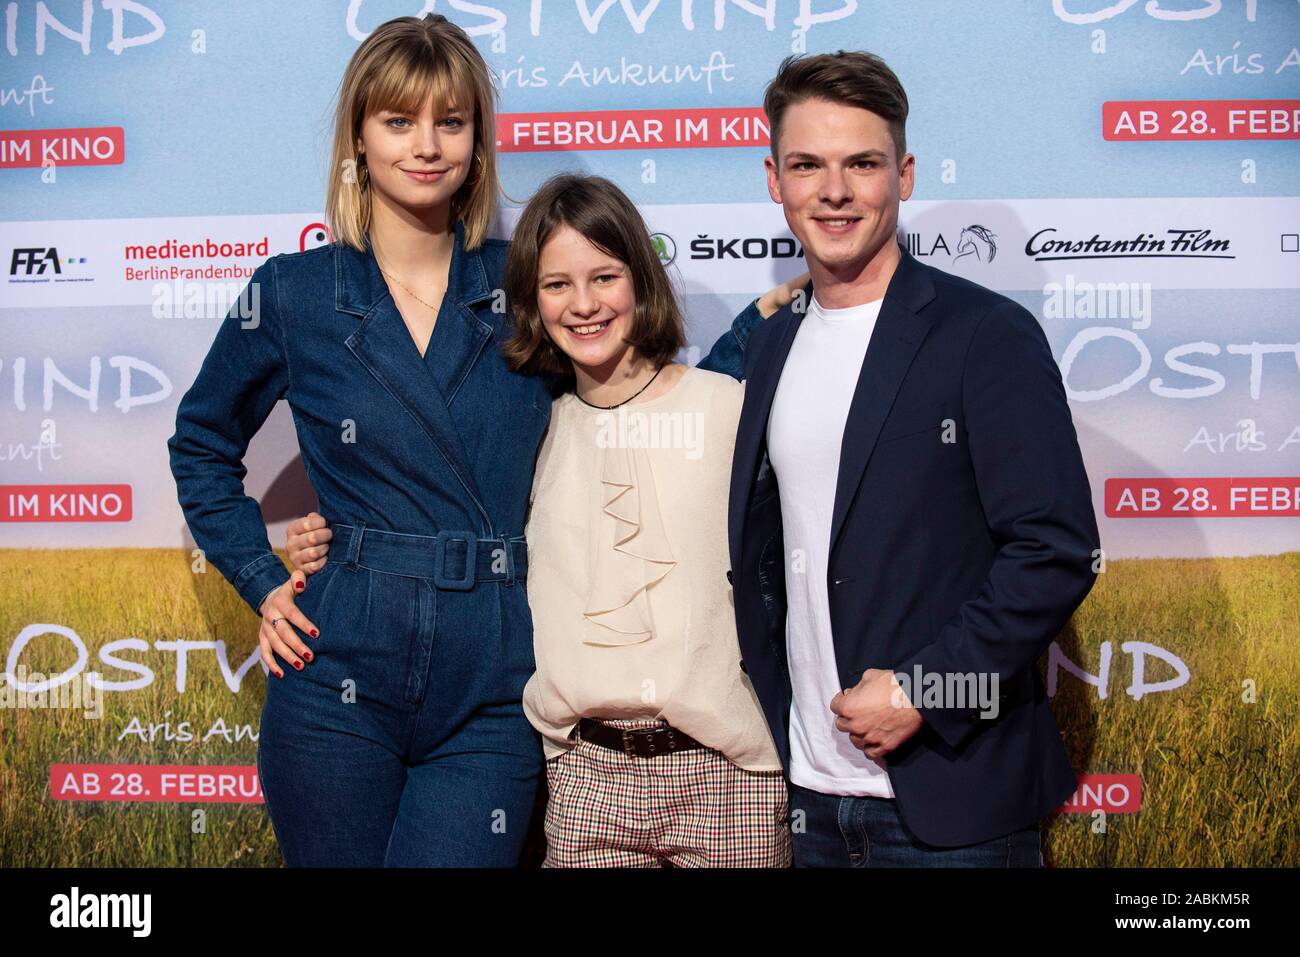 (l-r) The actors Hanna Binke, Luna Paiano and Marvin Linke from the film 'Ostwind - Aris Ankunft' pose on the red carpet at Equilaland in Munich (Upper Bavaria) on Sunday, 18 February 2019. [automated translation] Stock Photo